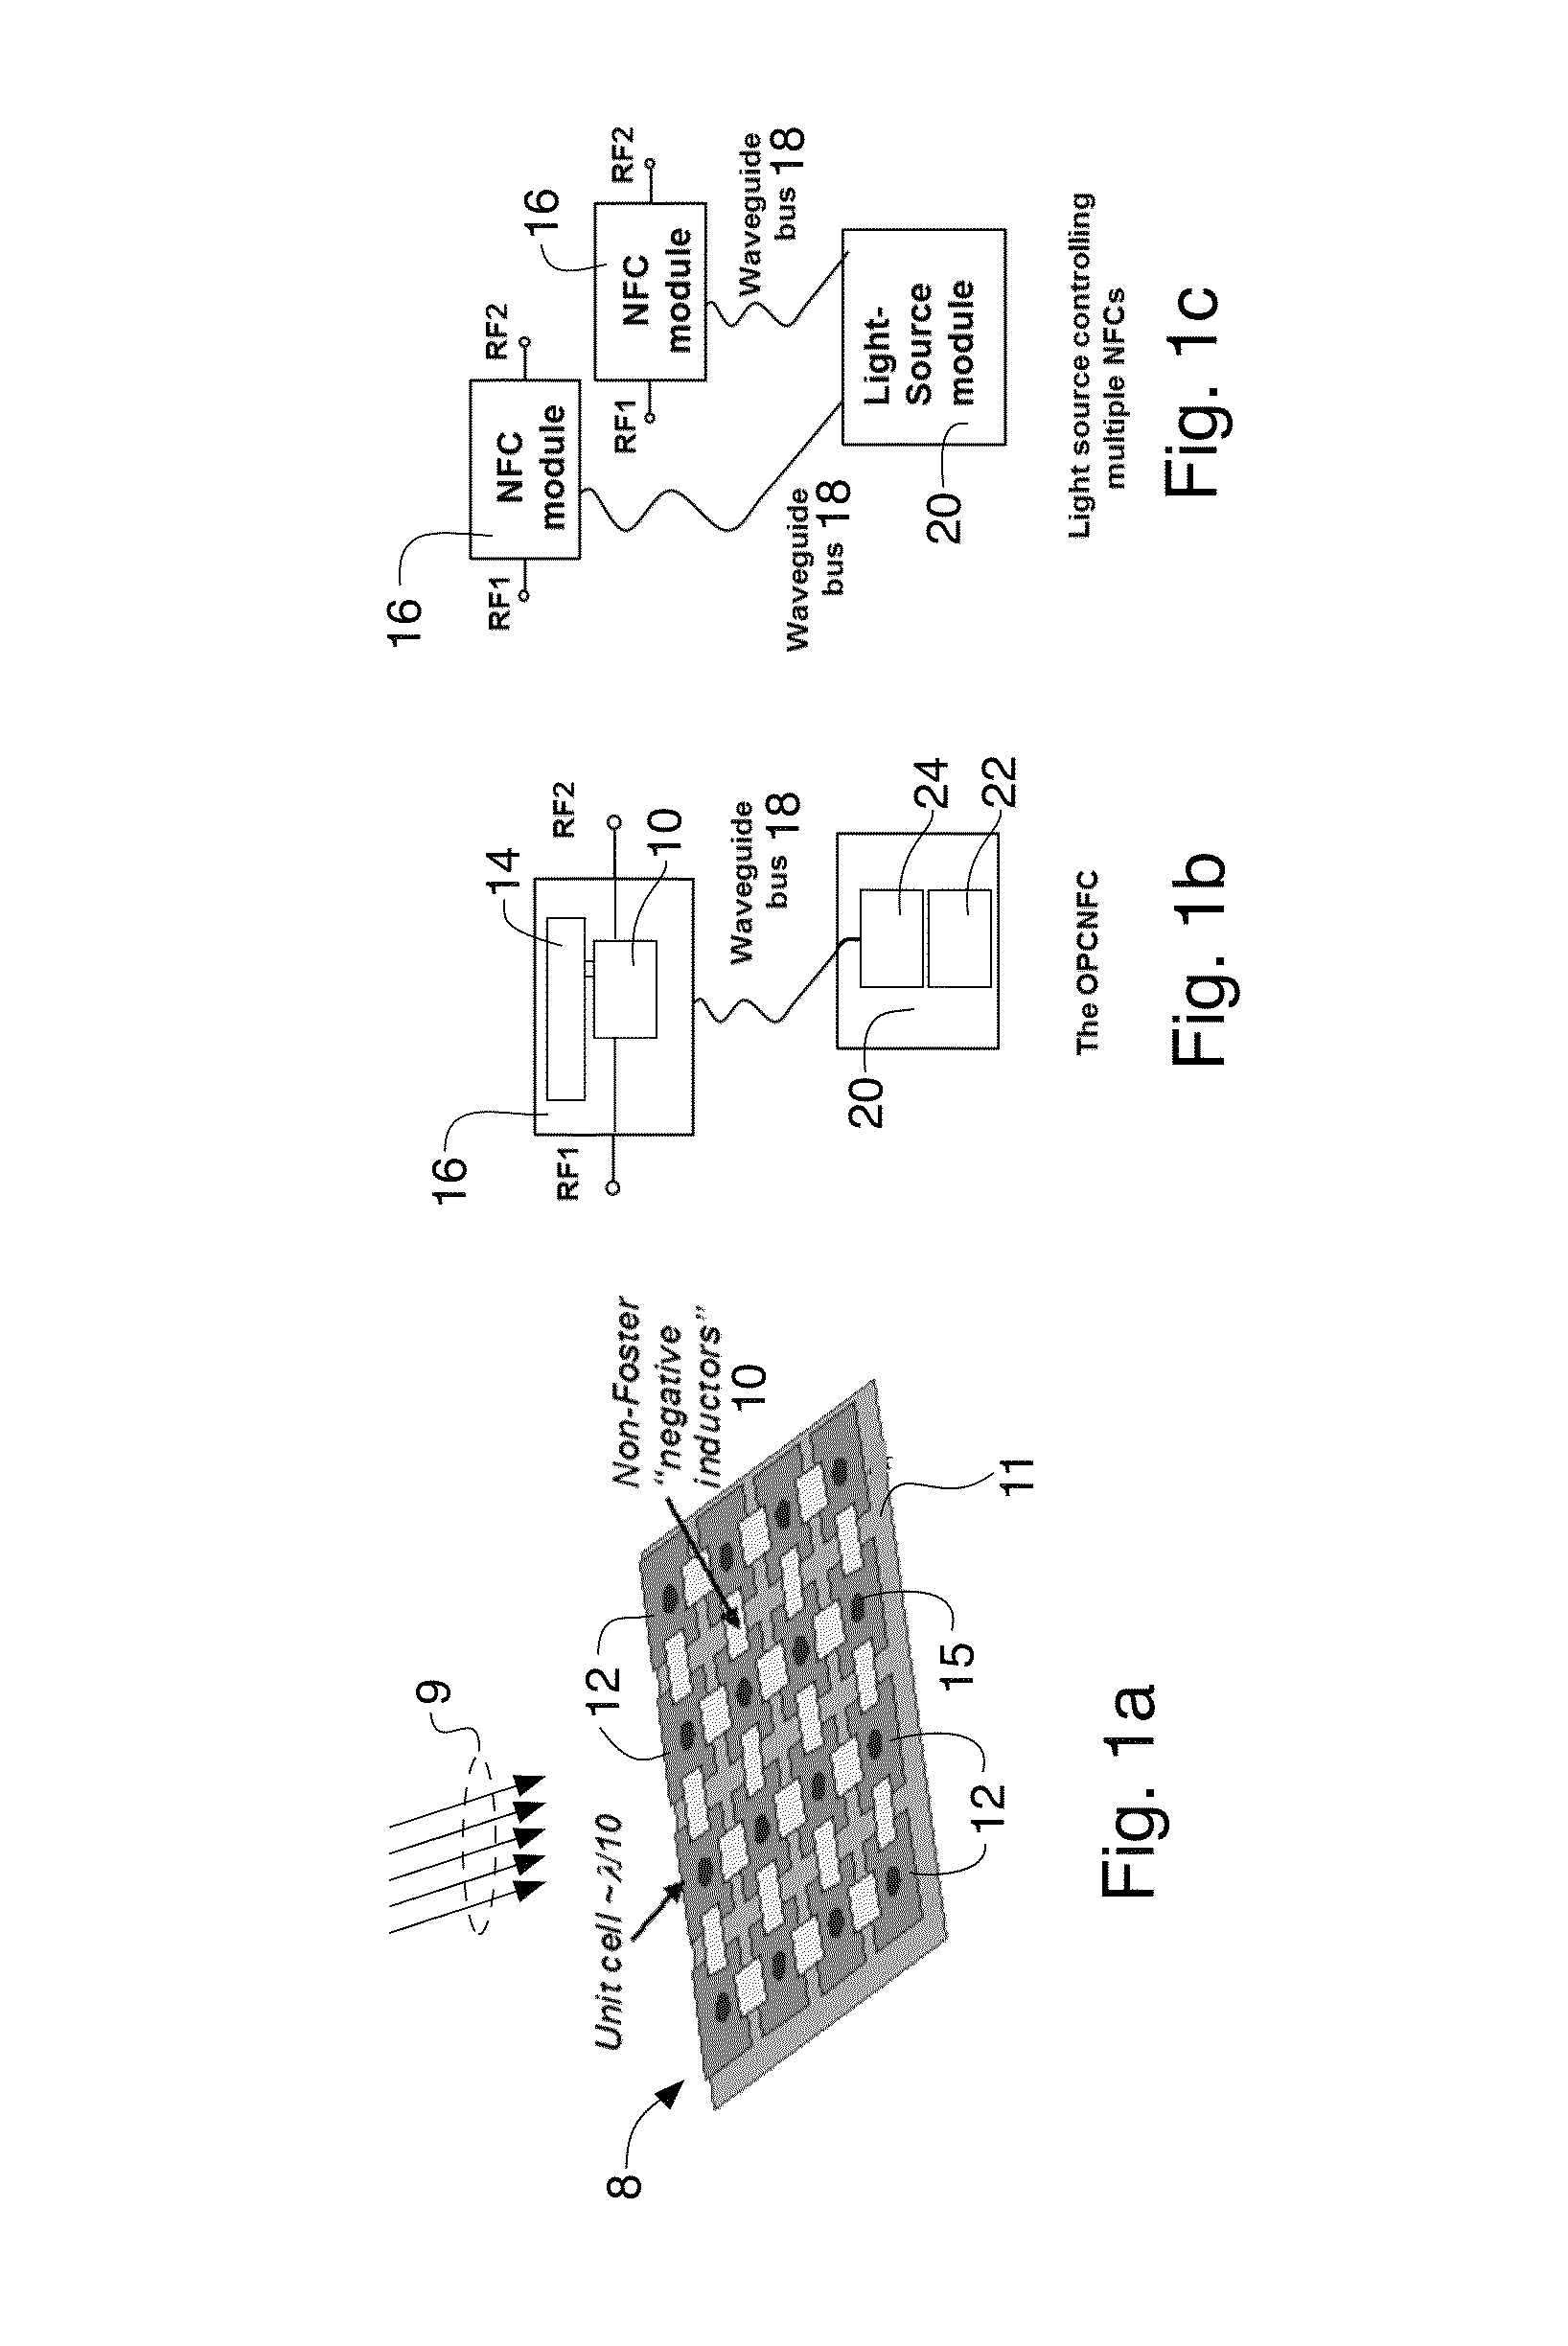 Optically powered and controlled non-foster circuit